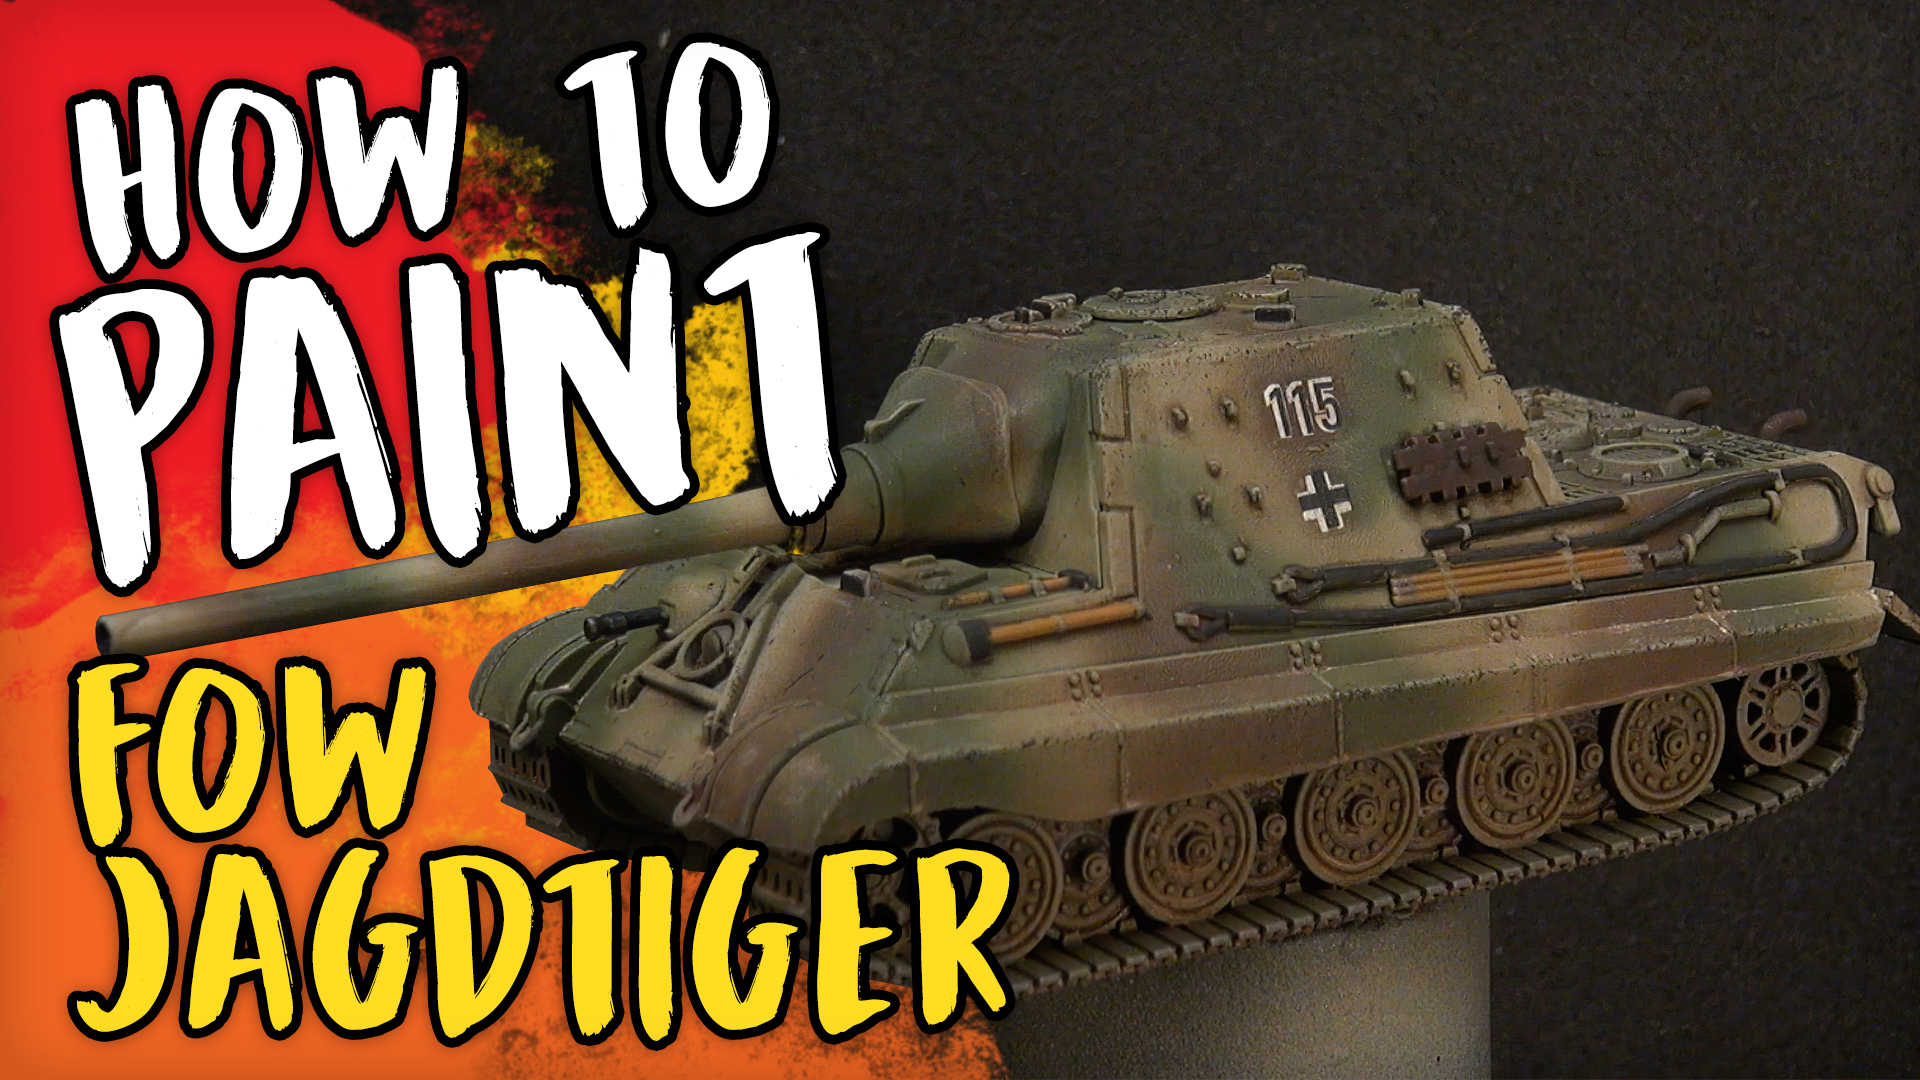 FOW - Jagdtiger coverimage